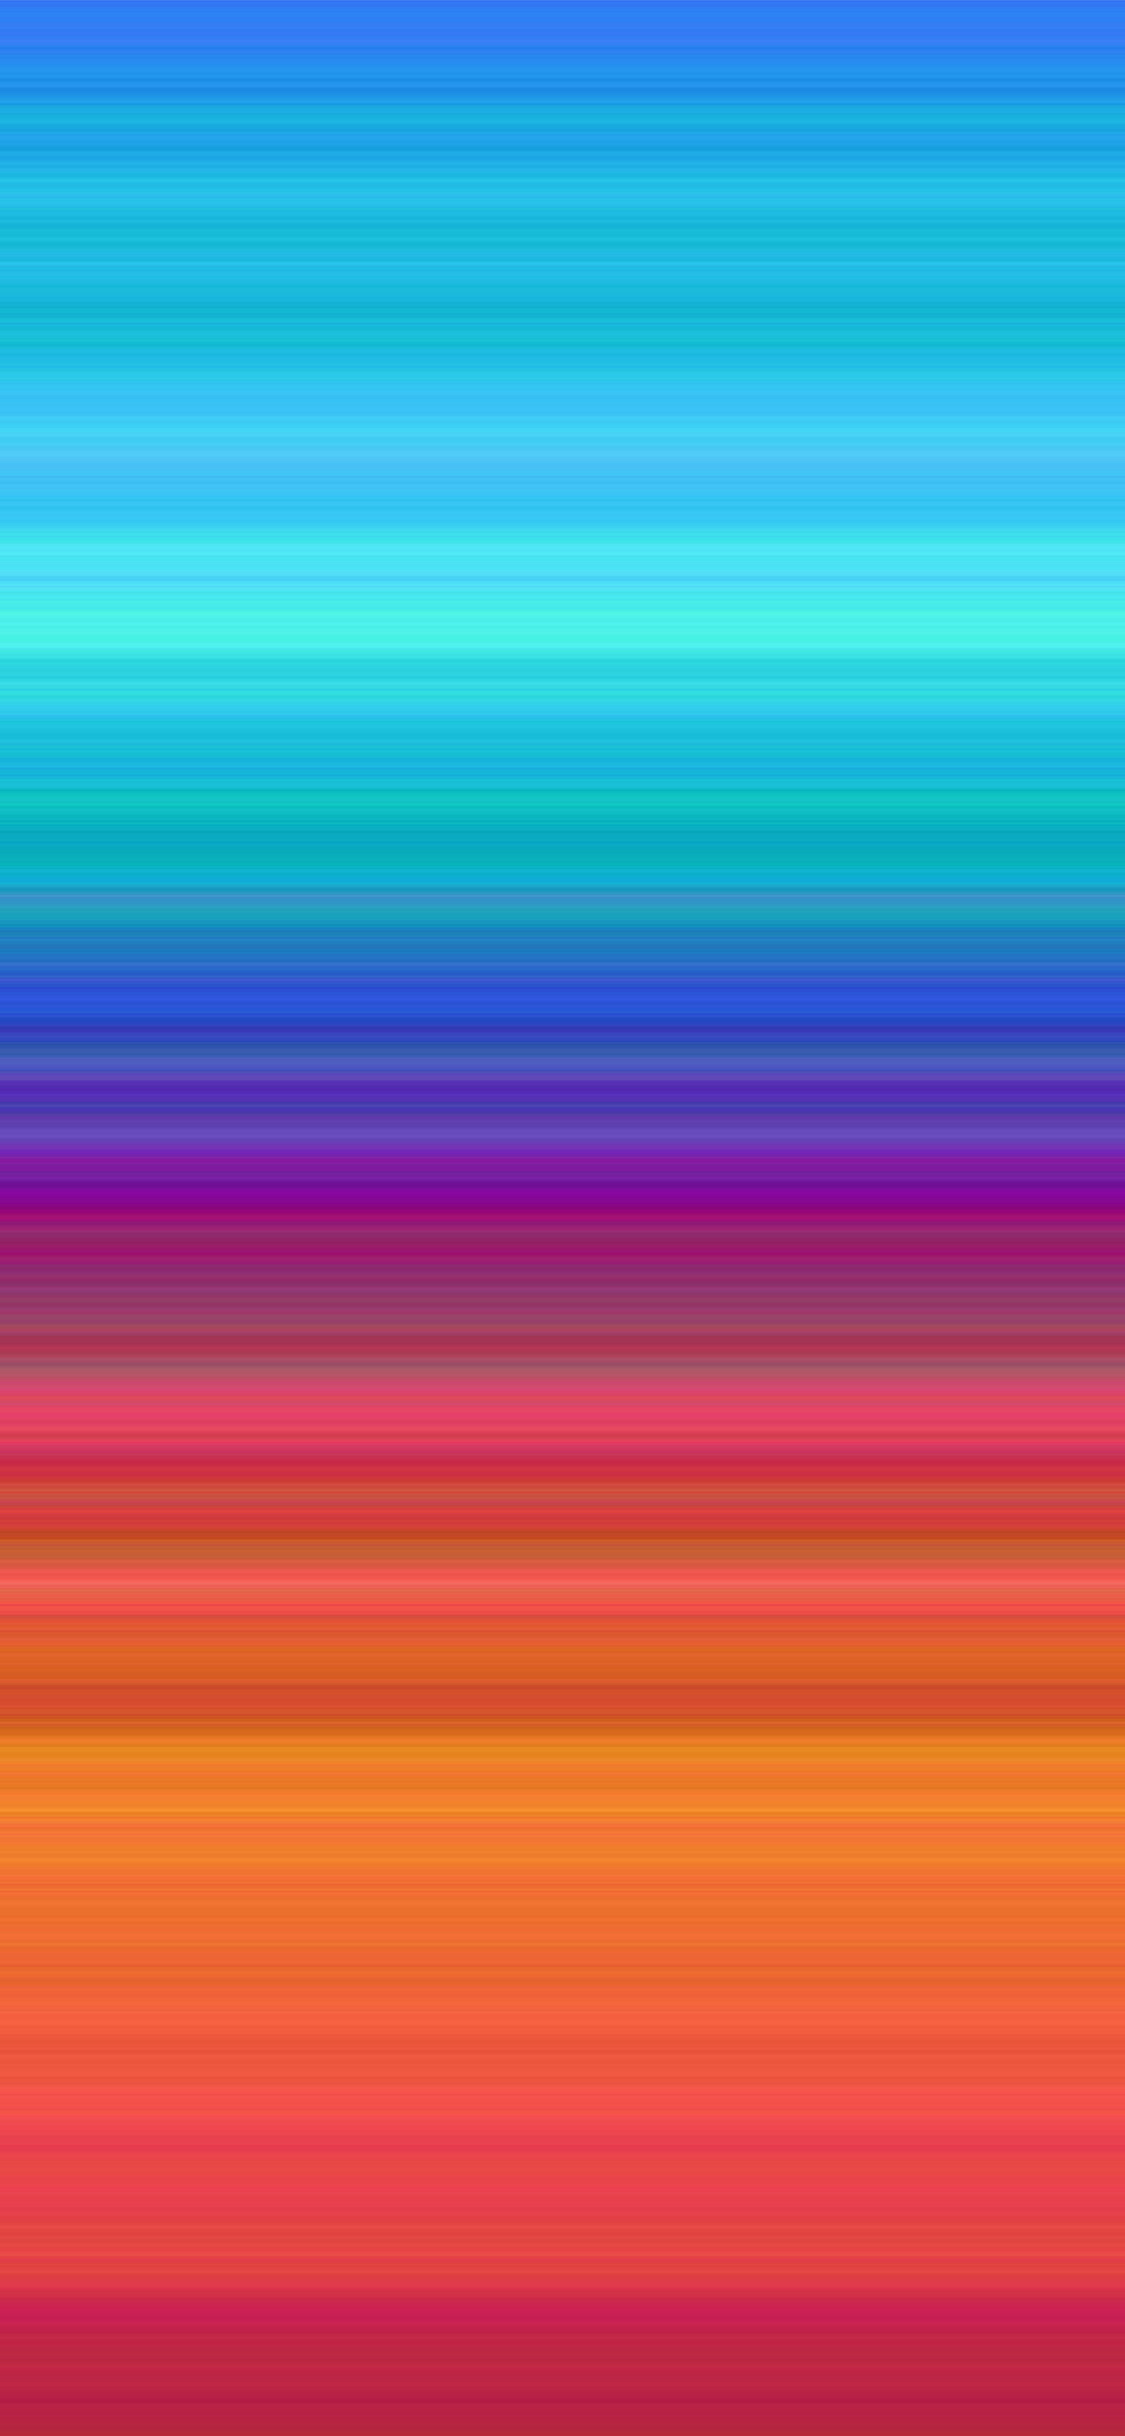 Vs04 Rainbow Line Abstract Pattern Blue Red - Iphone Xs Max Wallpaper Abstract , HD Wallpaper & Backgrounds